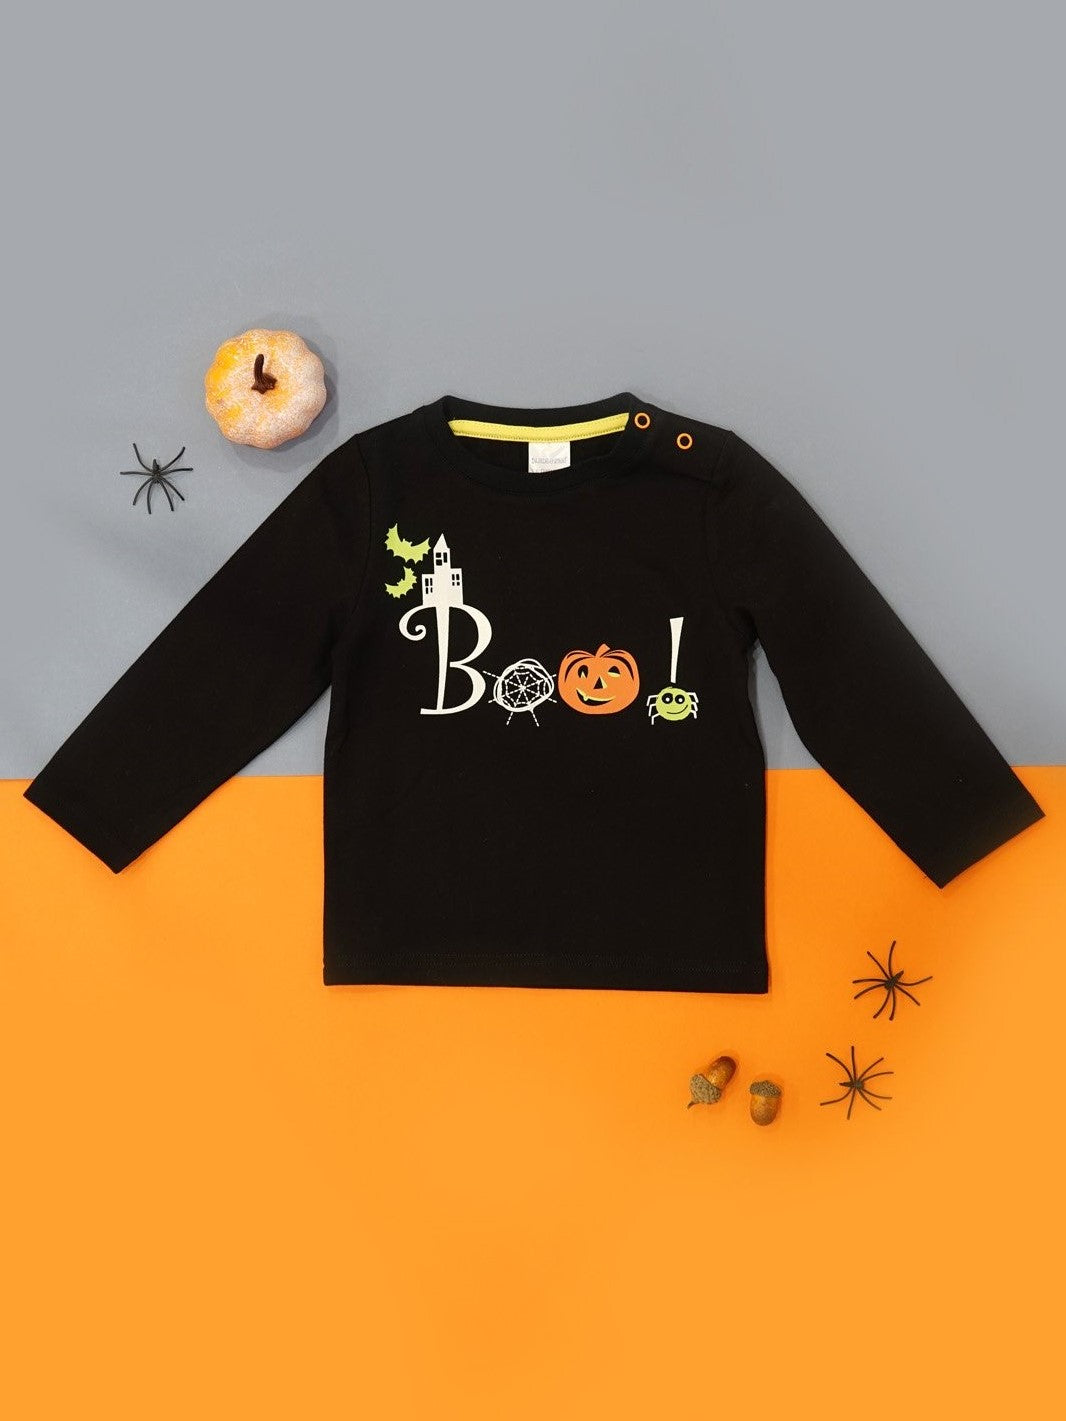 boo top by blade and rose